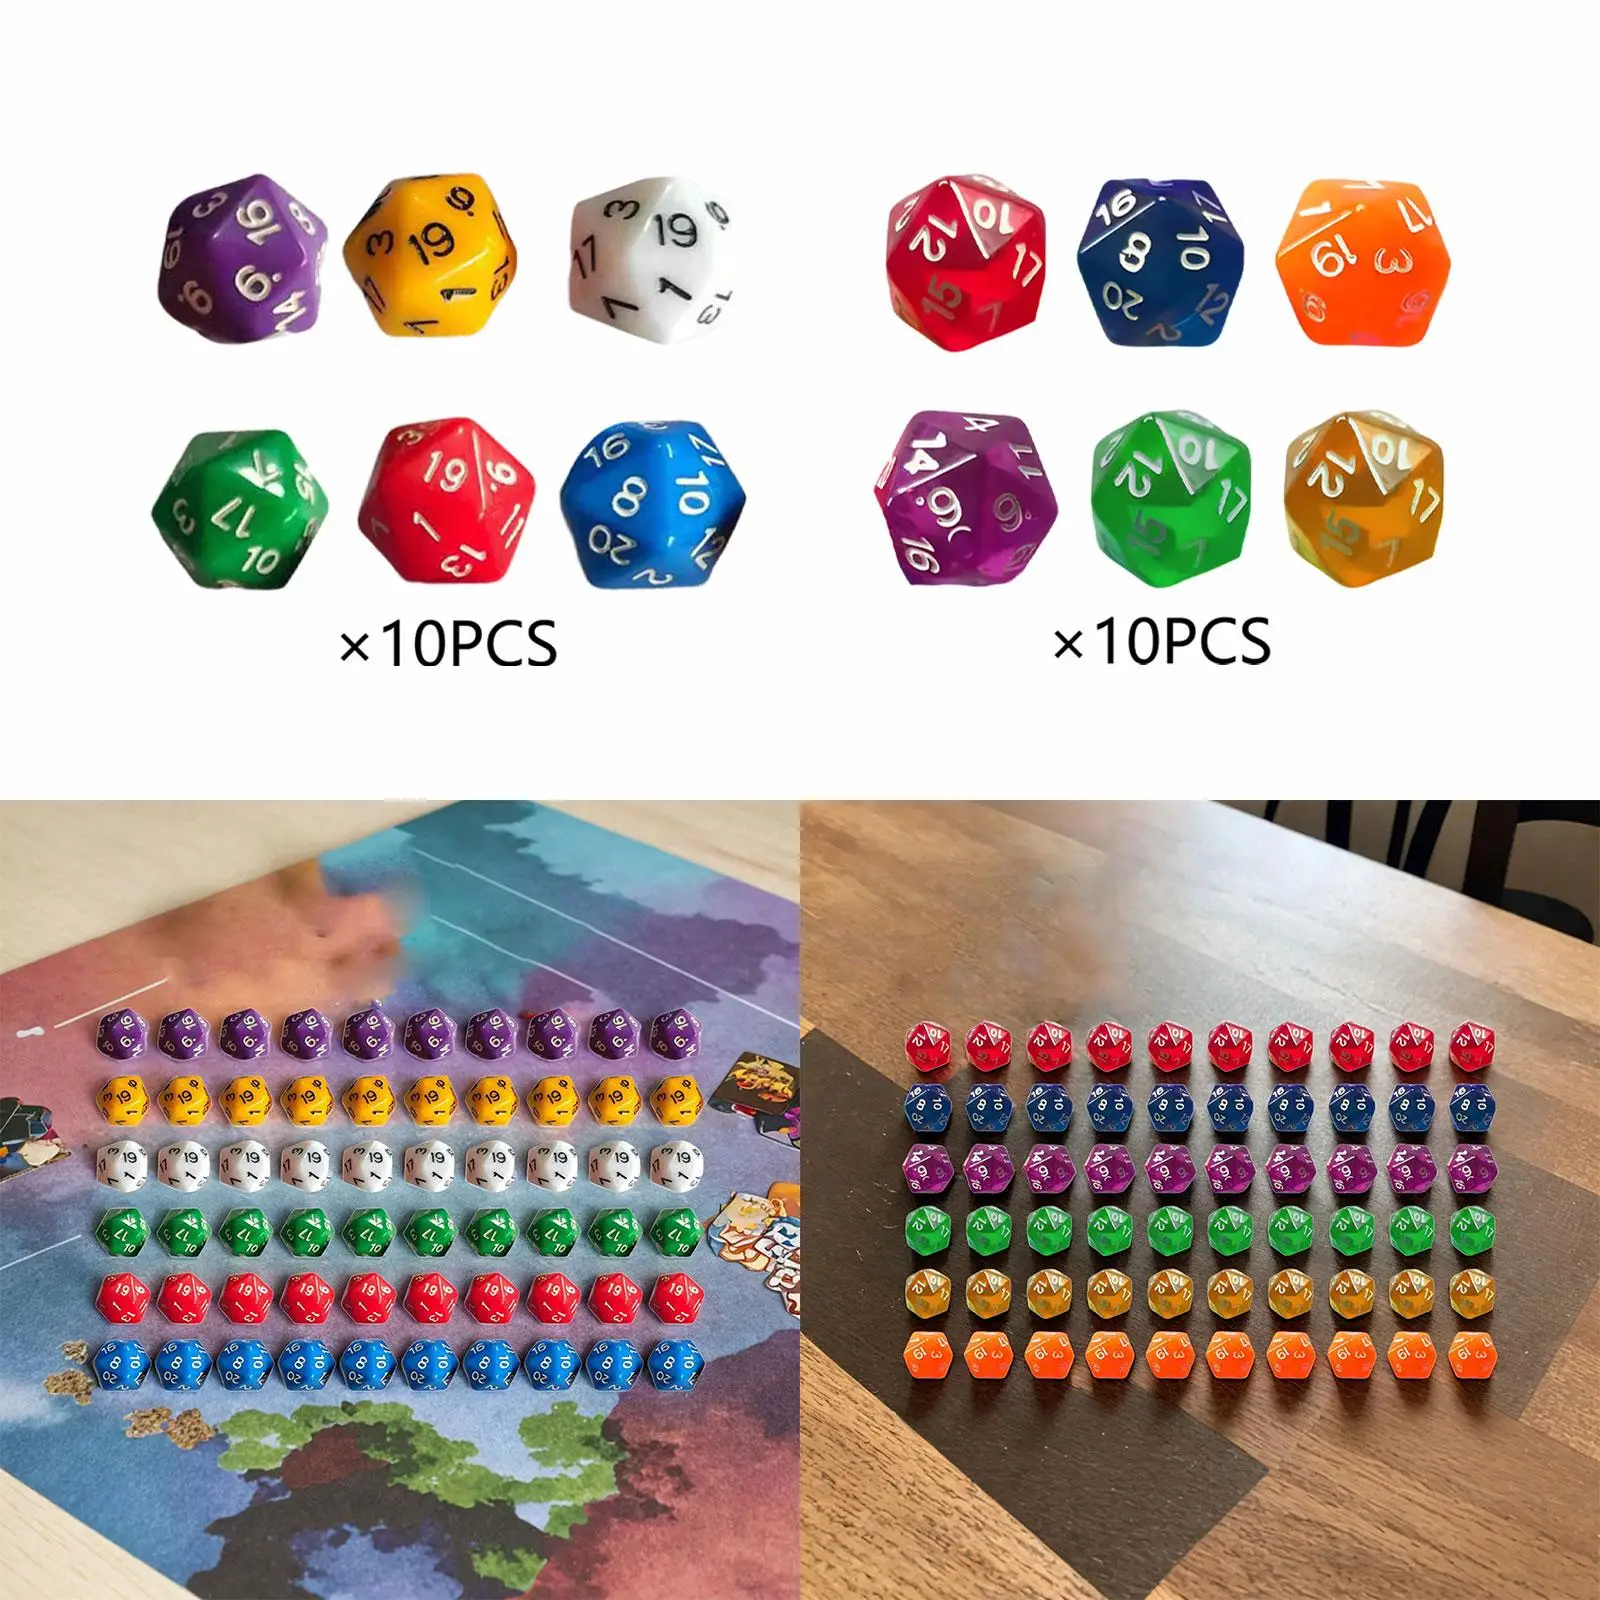 60Pcs D20 Polyhedral Dice Role Playing Game Dices 20mm Multi Sided Dices for Role Playing Party Game Table Game Card Game